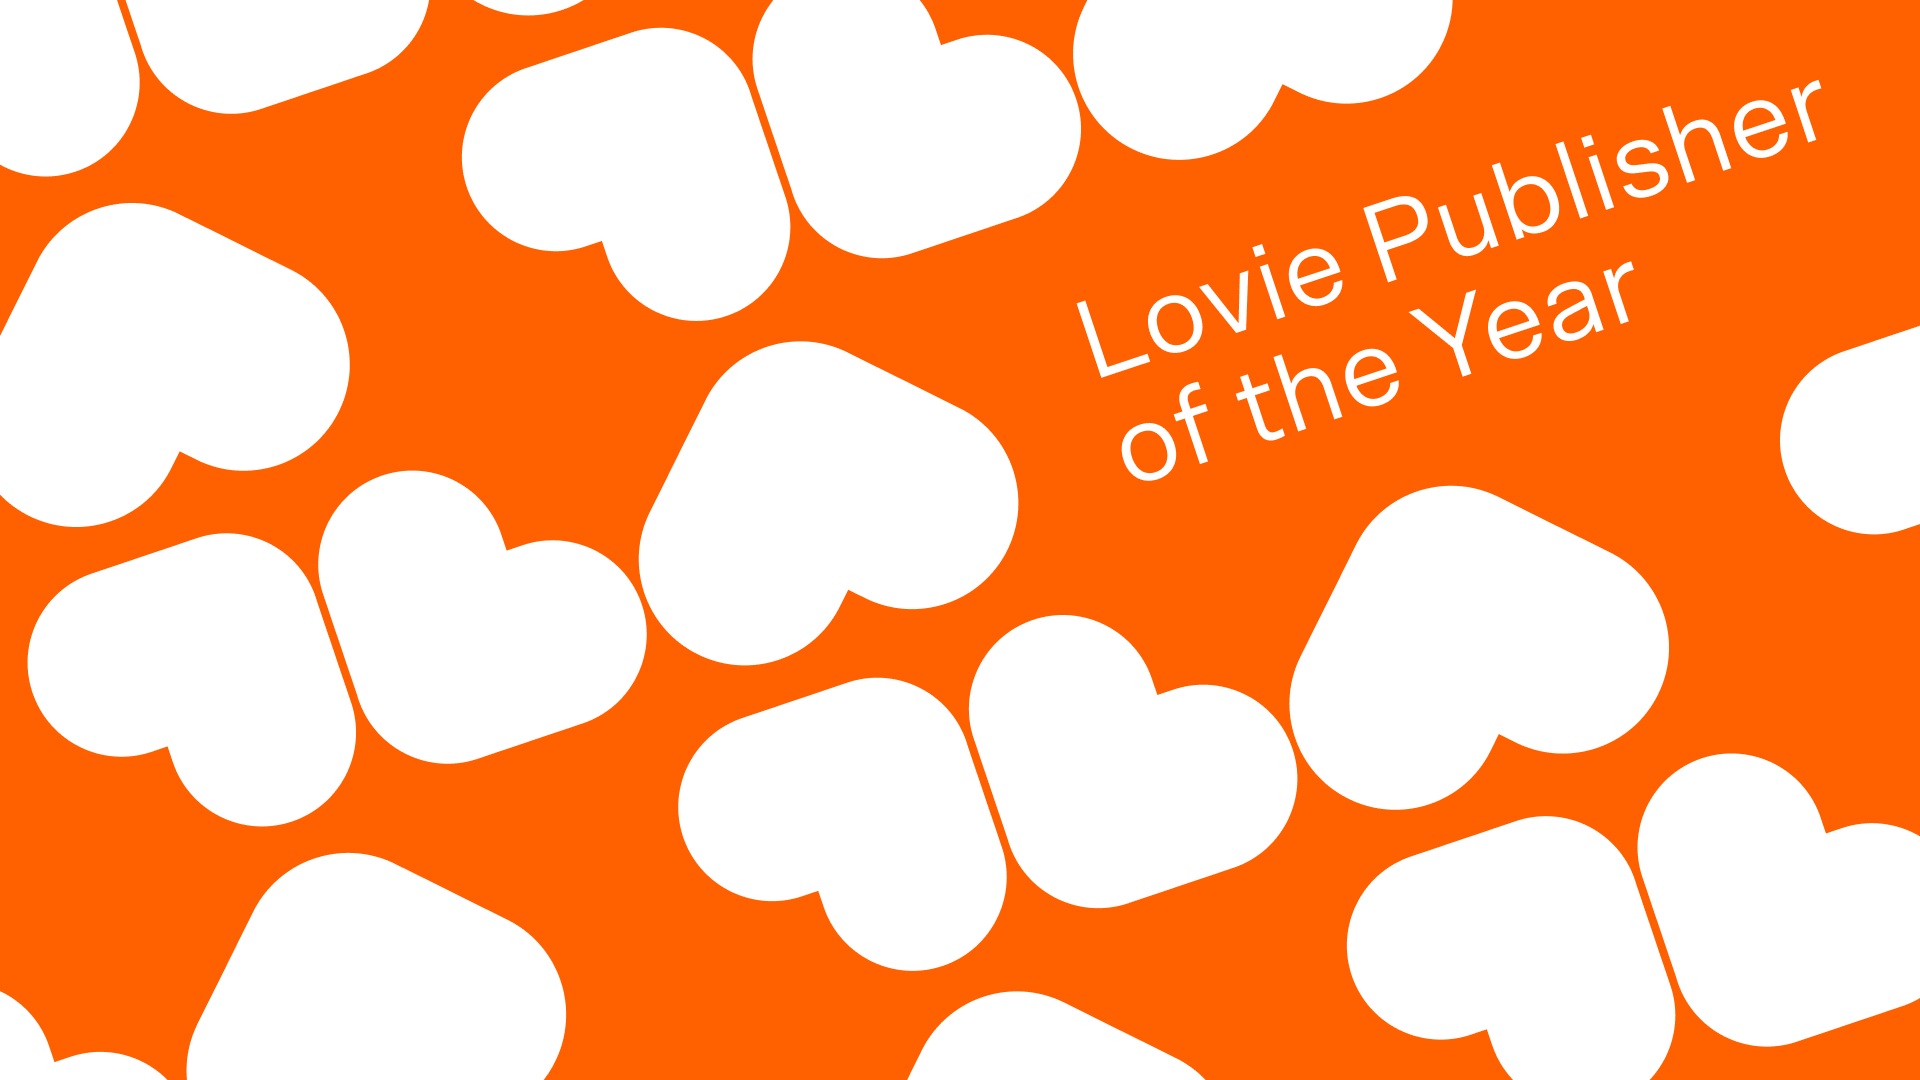 Introducing: The Lovie European Publisher of the Year Award